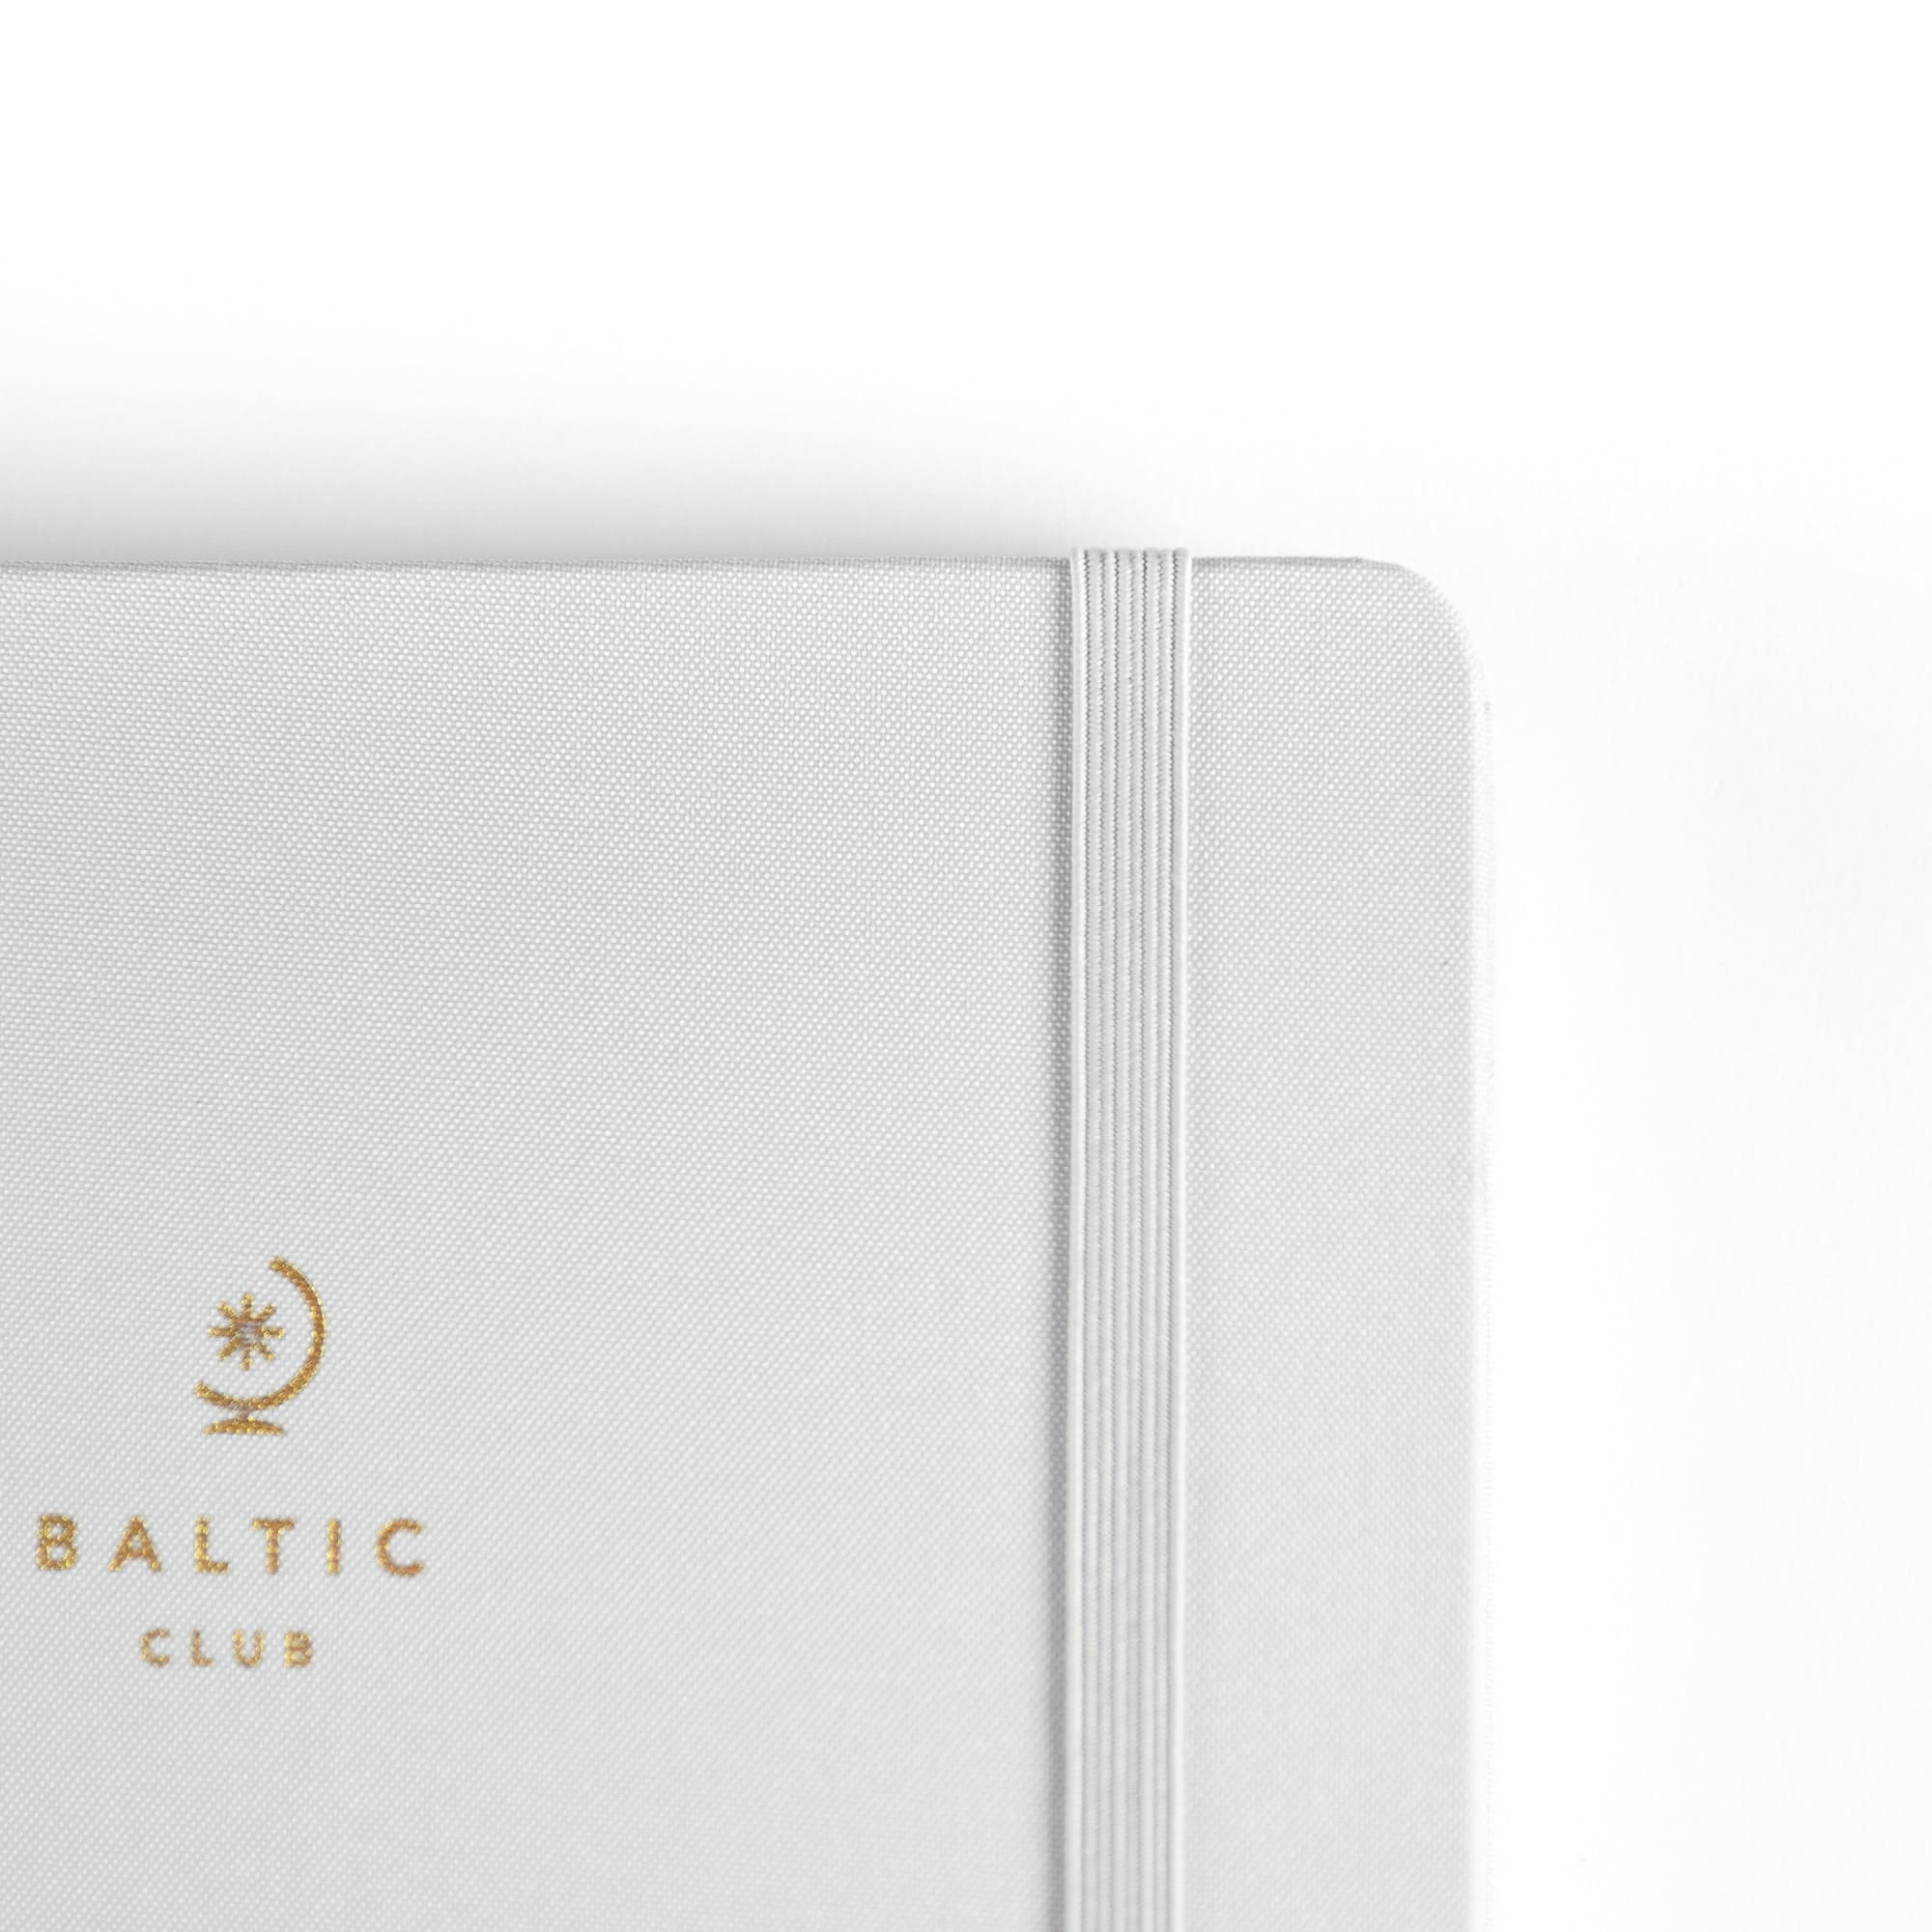 The elastic band on the front cover of the Grey Cloth-covered Undated Planner from The Baltic Club